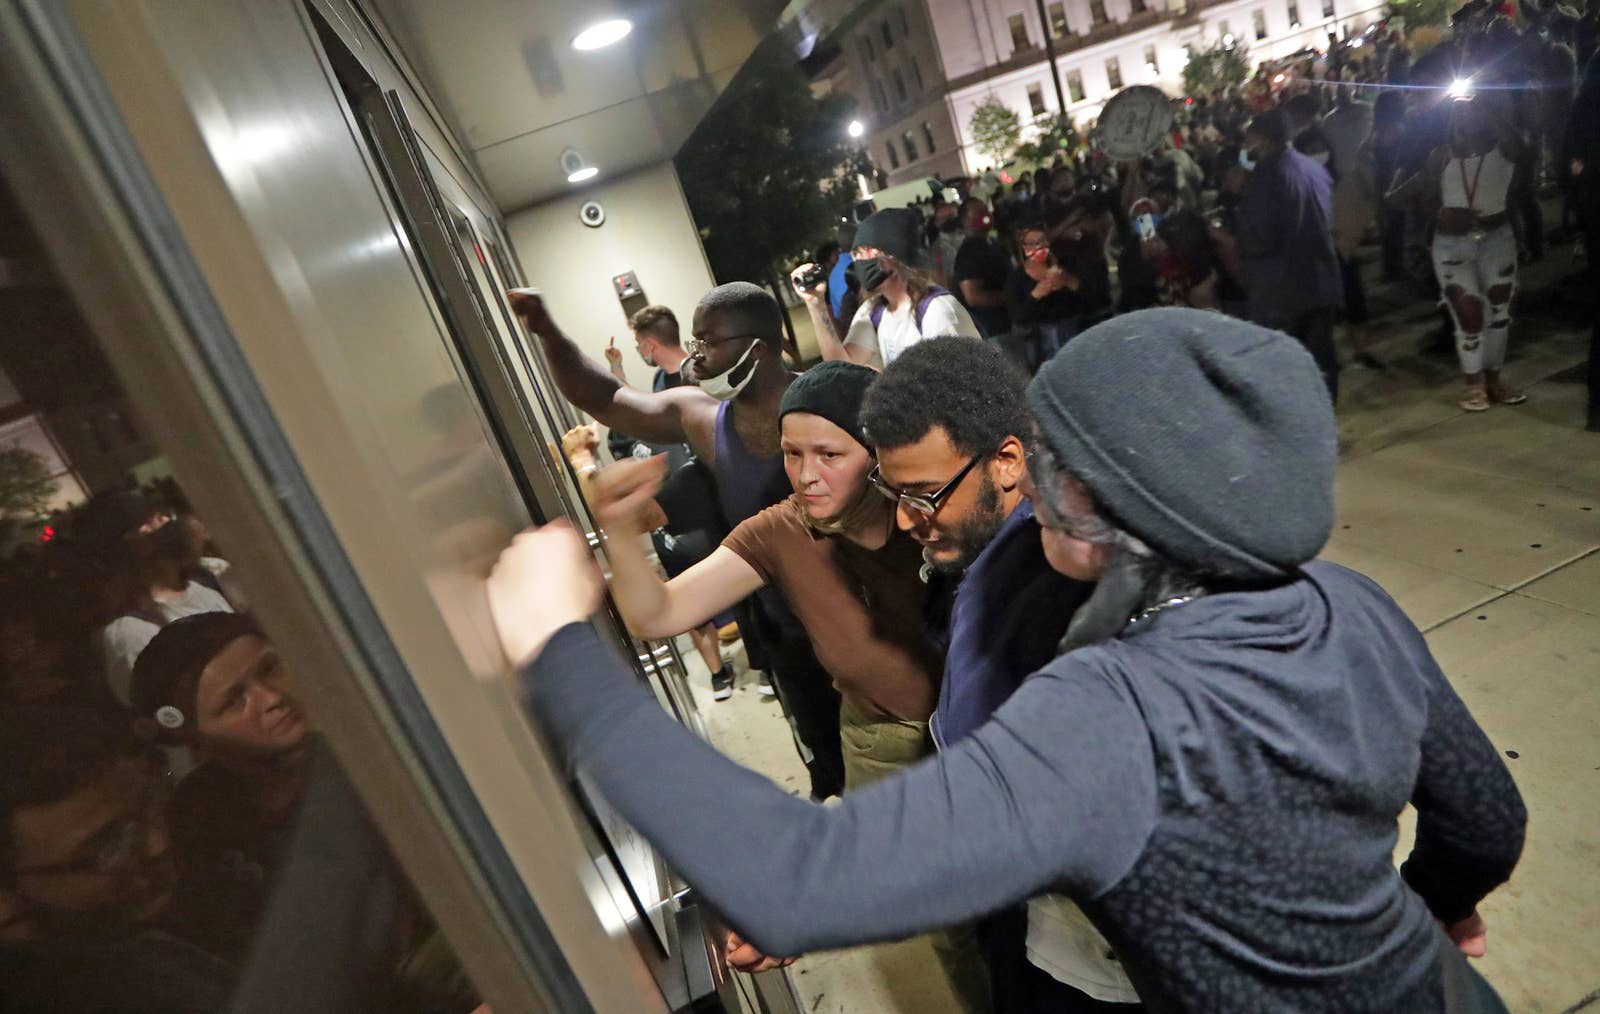 Three people pound on a door with a larger crowd behind them 